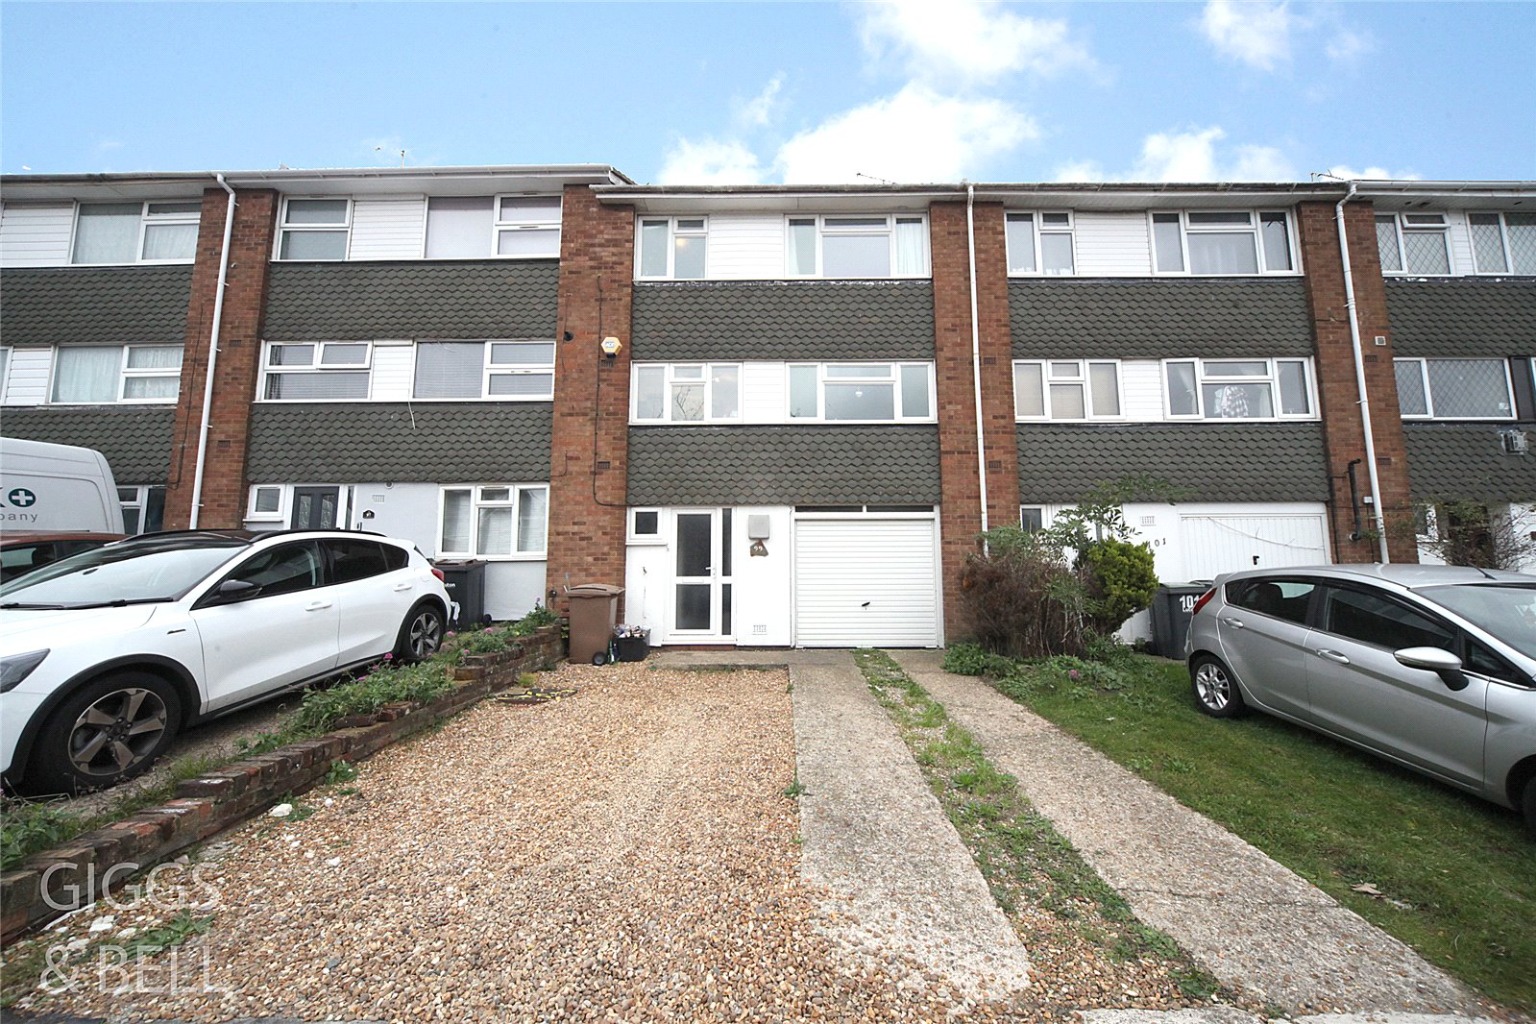 This spacious townhouse located in the highly popular Vauxhall Park location which is well sought after due to its excellent access to travel hubs including London Luton airport, Junction 10 of the motorway as well as Park Way train station all of these being within a 2 mile distance.